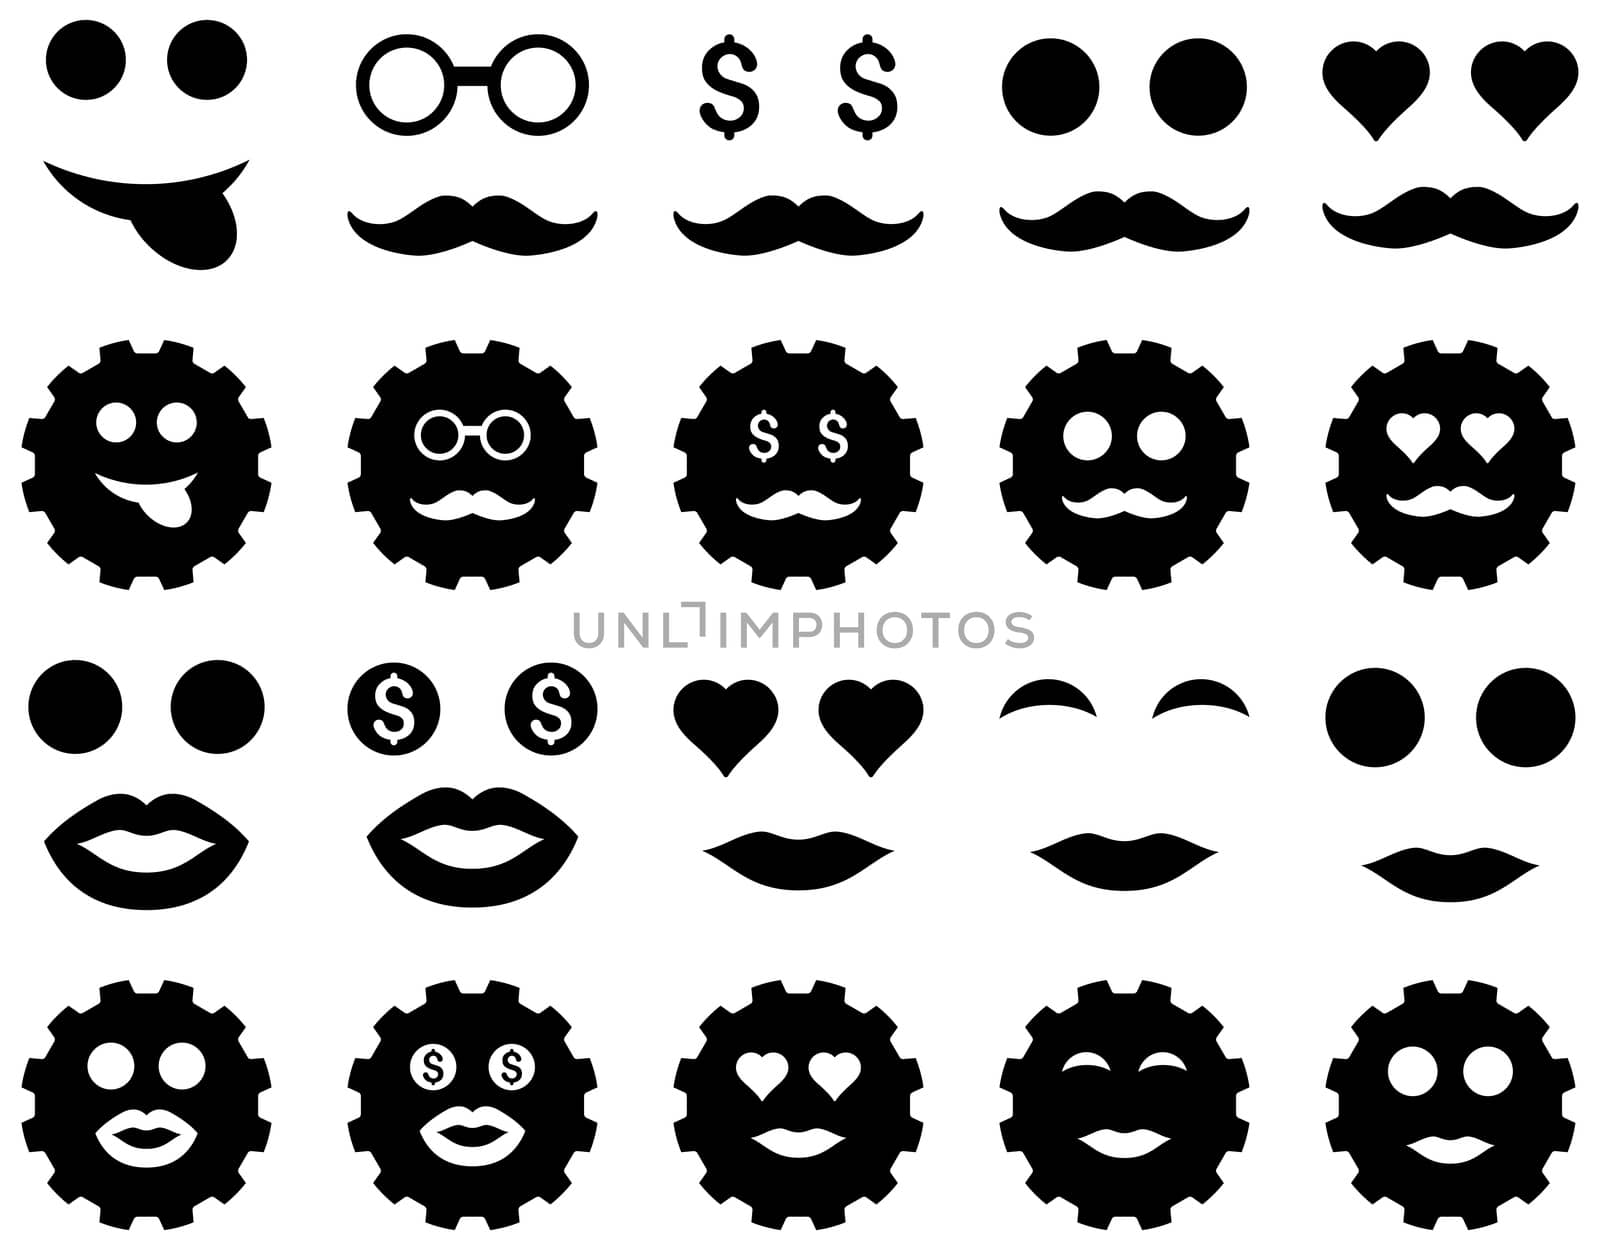 Tool, gear, smile, emotion icons. Glyph set style is flat images, black symbols, isolated on a white background.